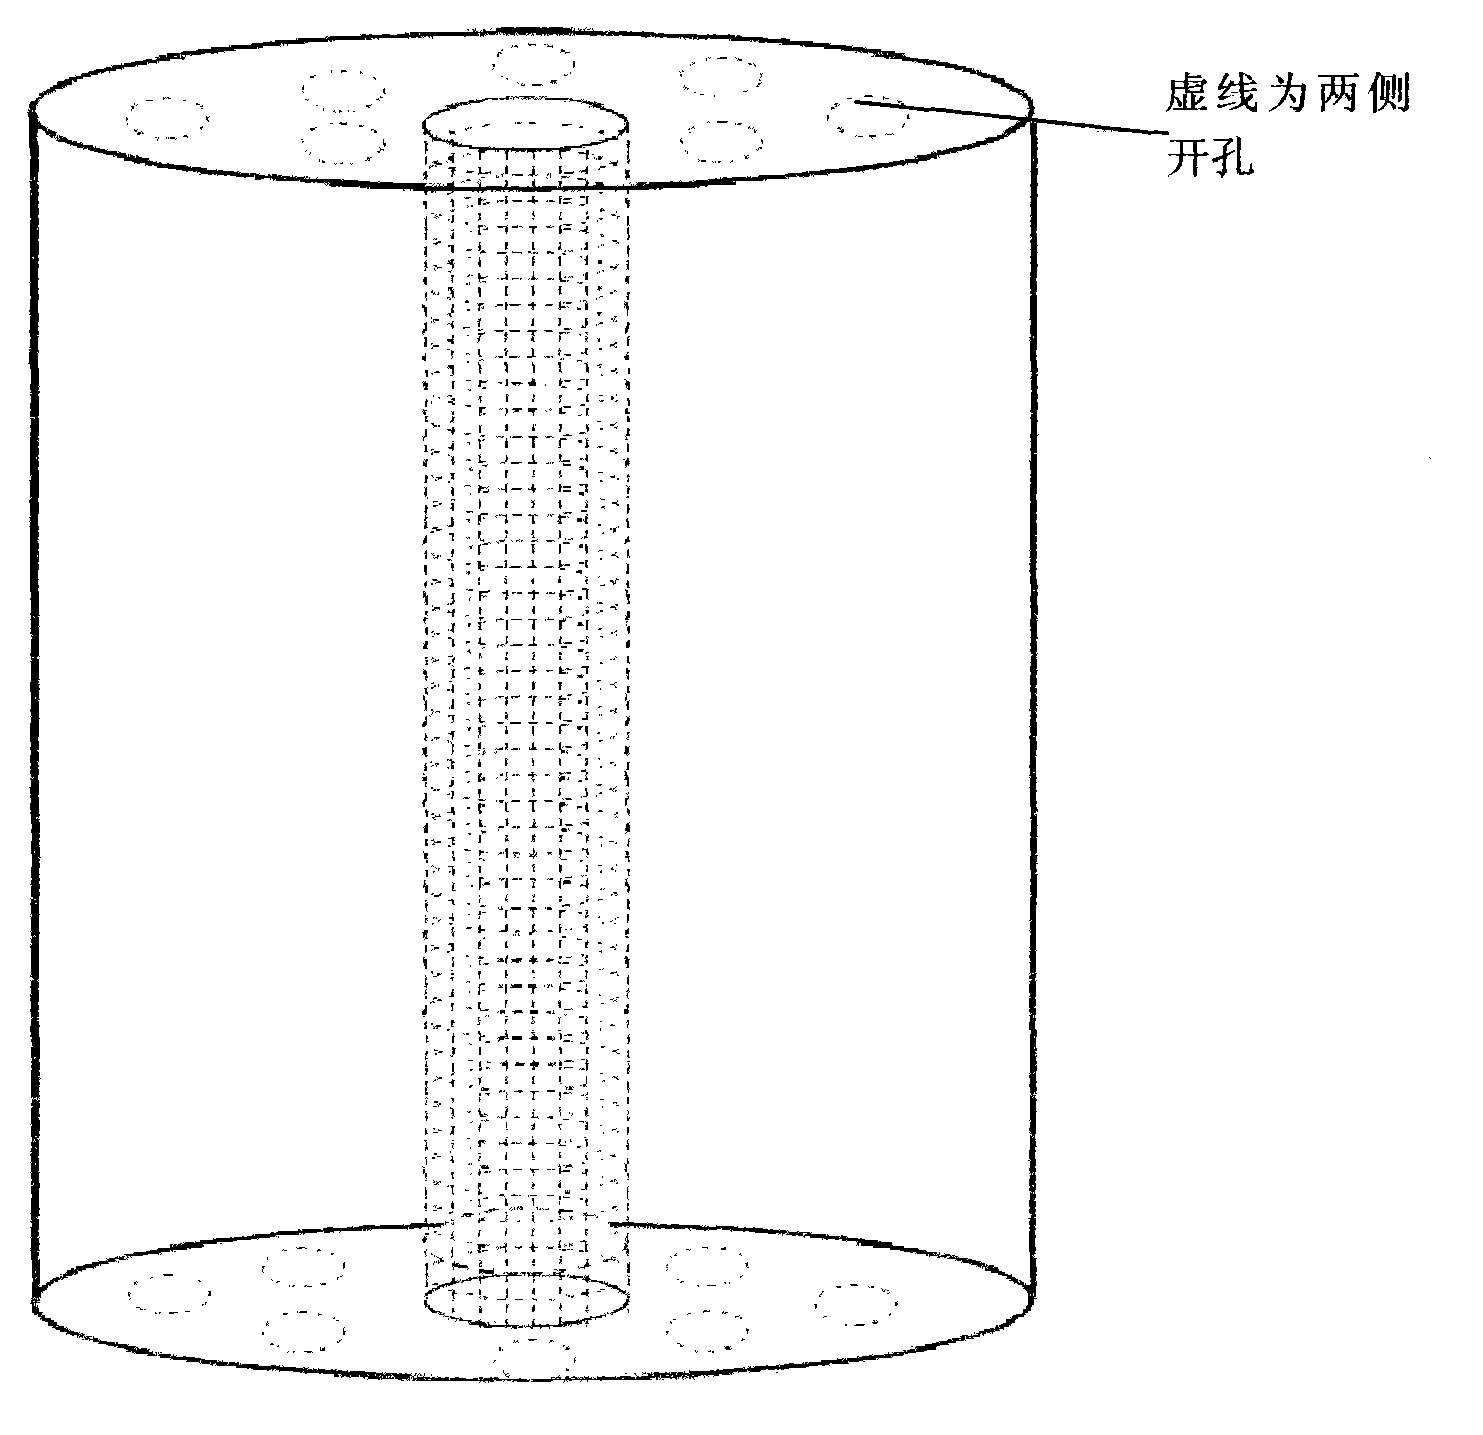 Preparation method of activated carbon filter